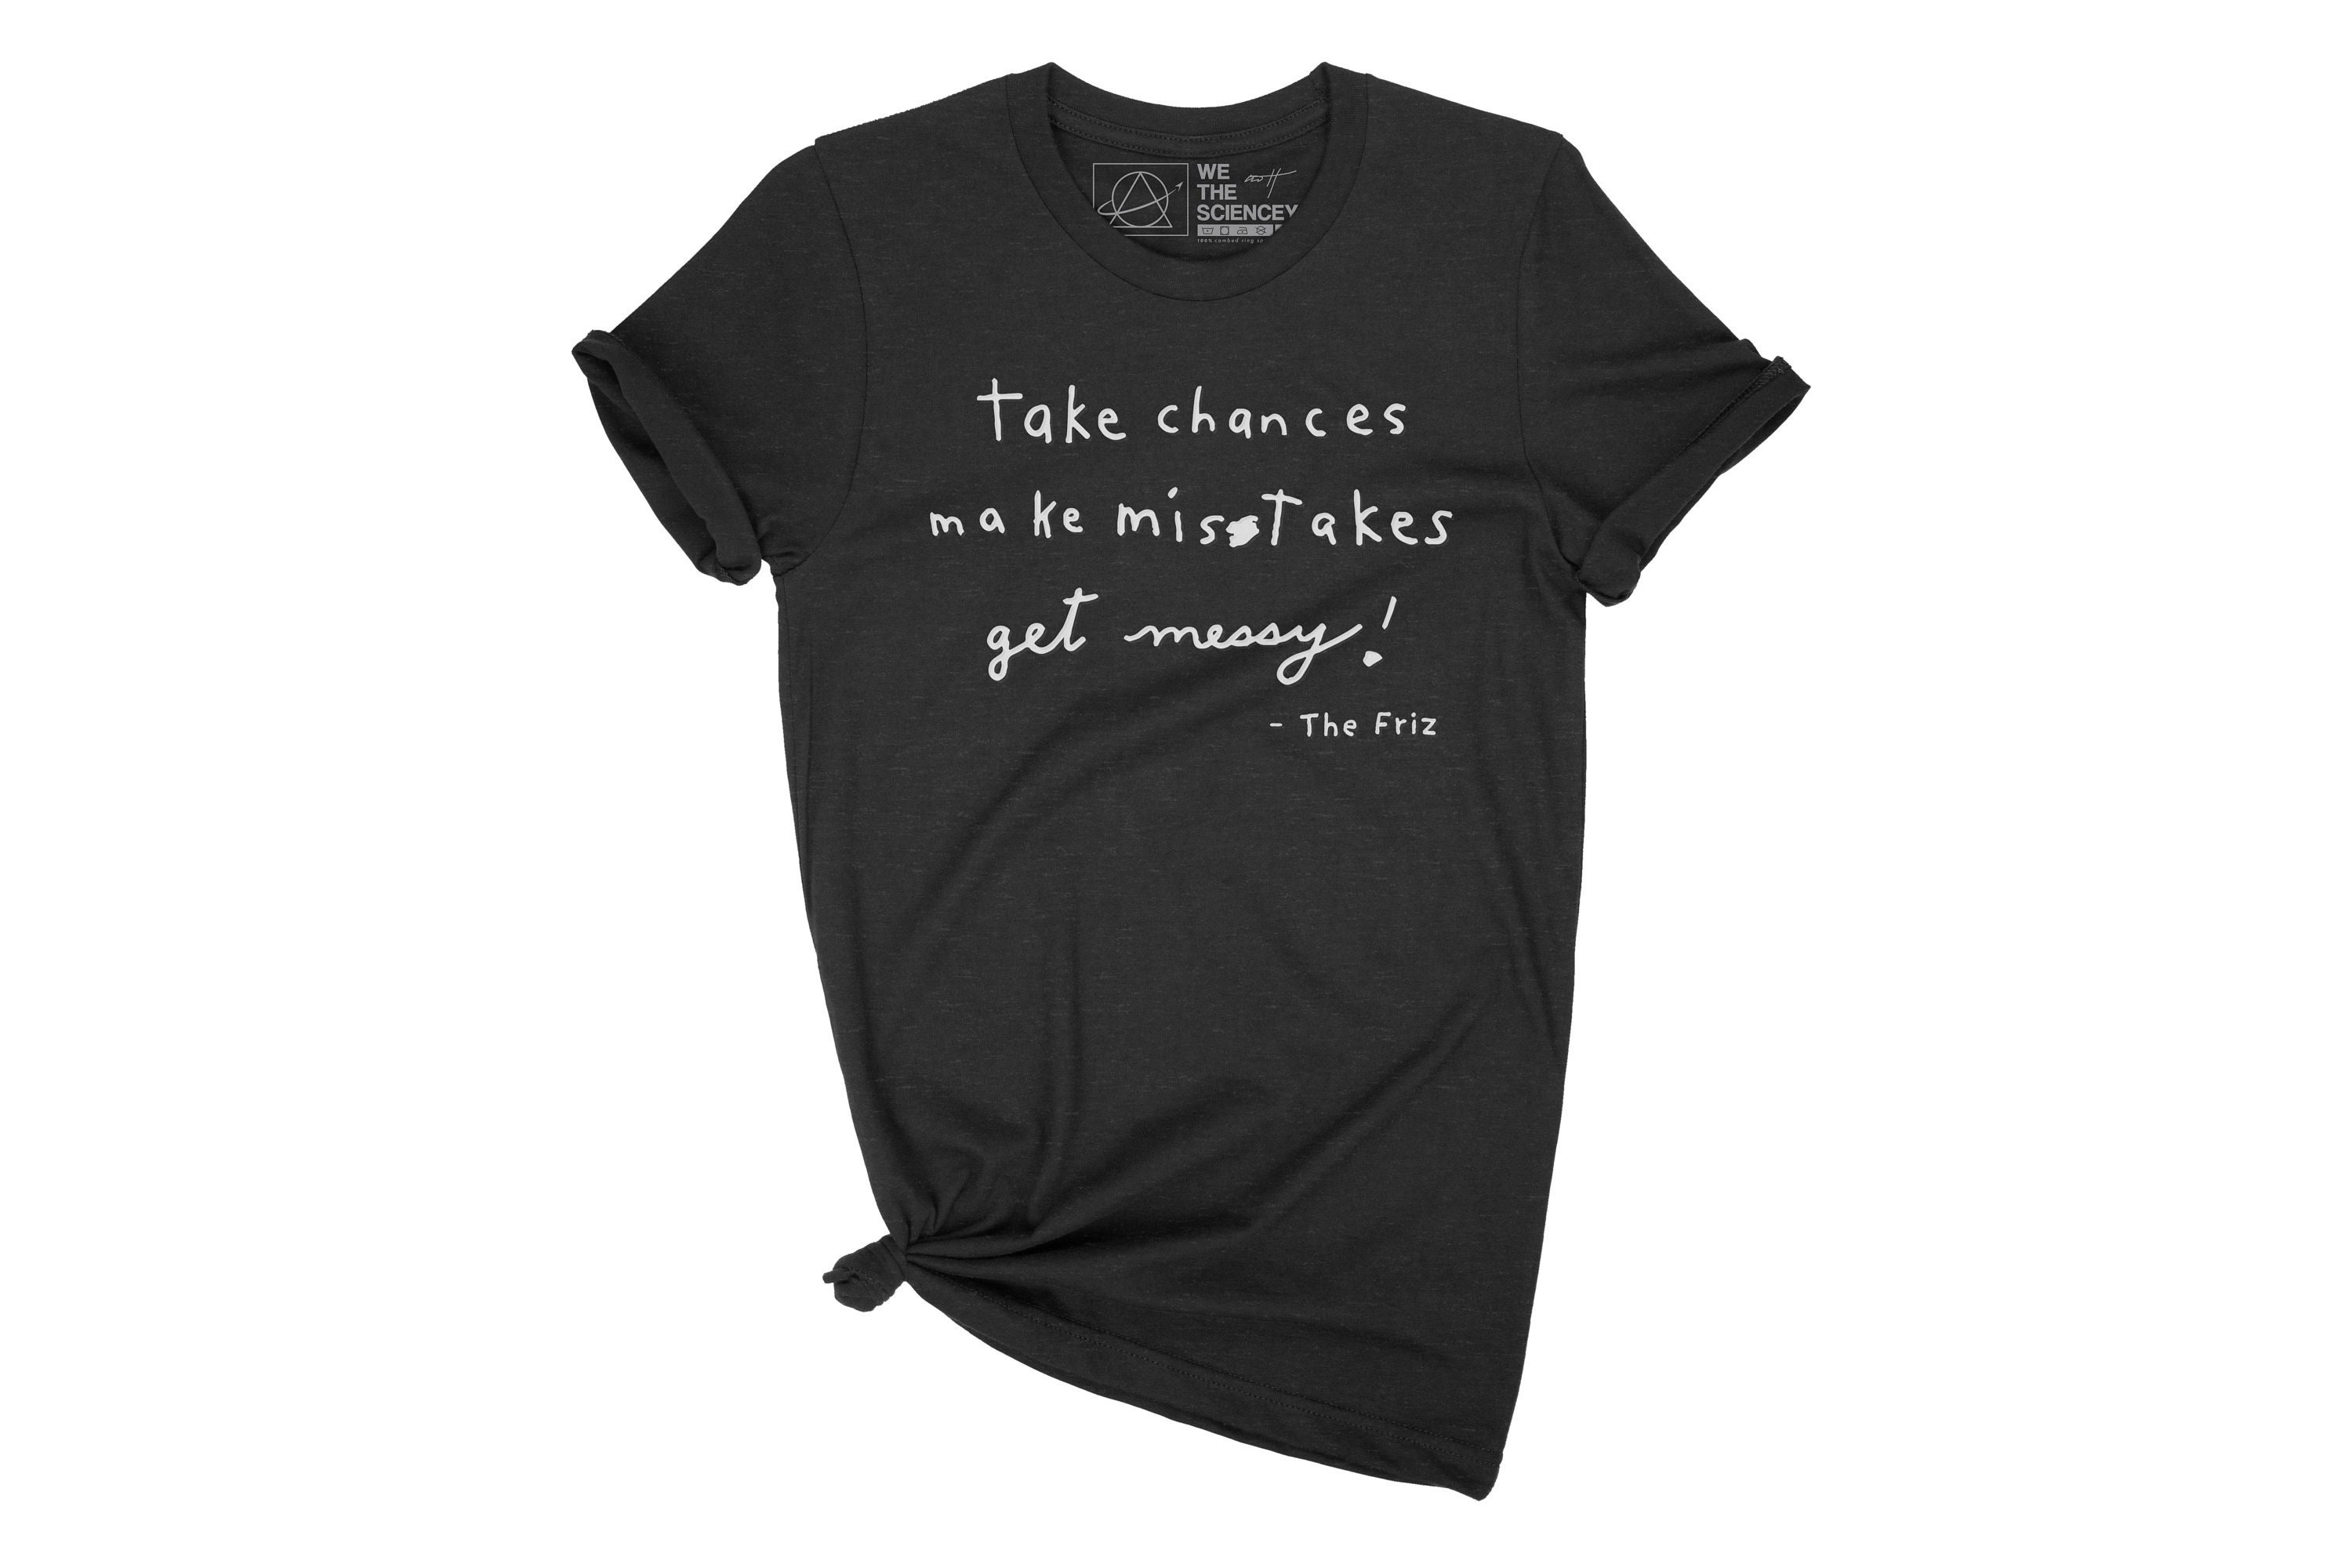 Take Chances Make Mistakes Get Messy Shirt Teacher Life 2021 Magic School Bus Tee Ms Frizzle Shirt Miss Frizzle Quote